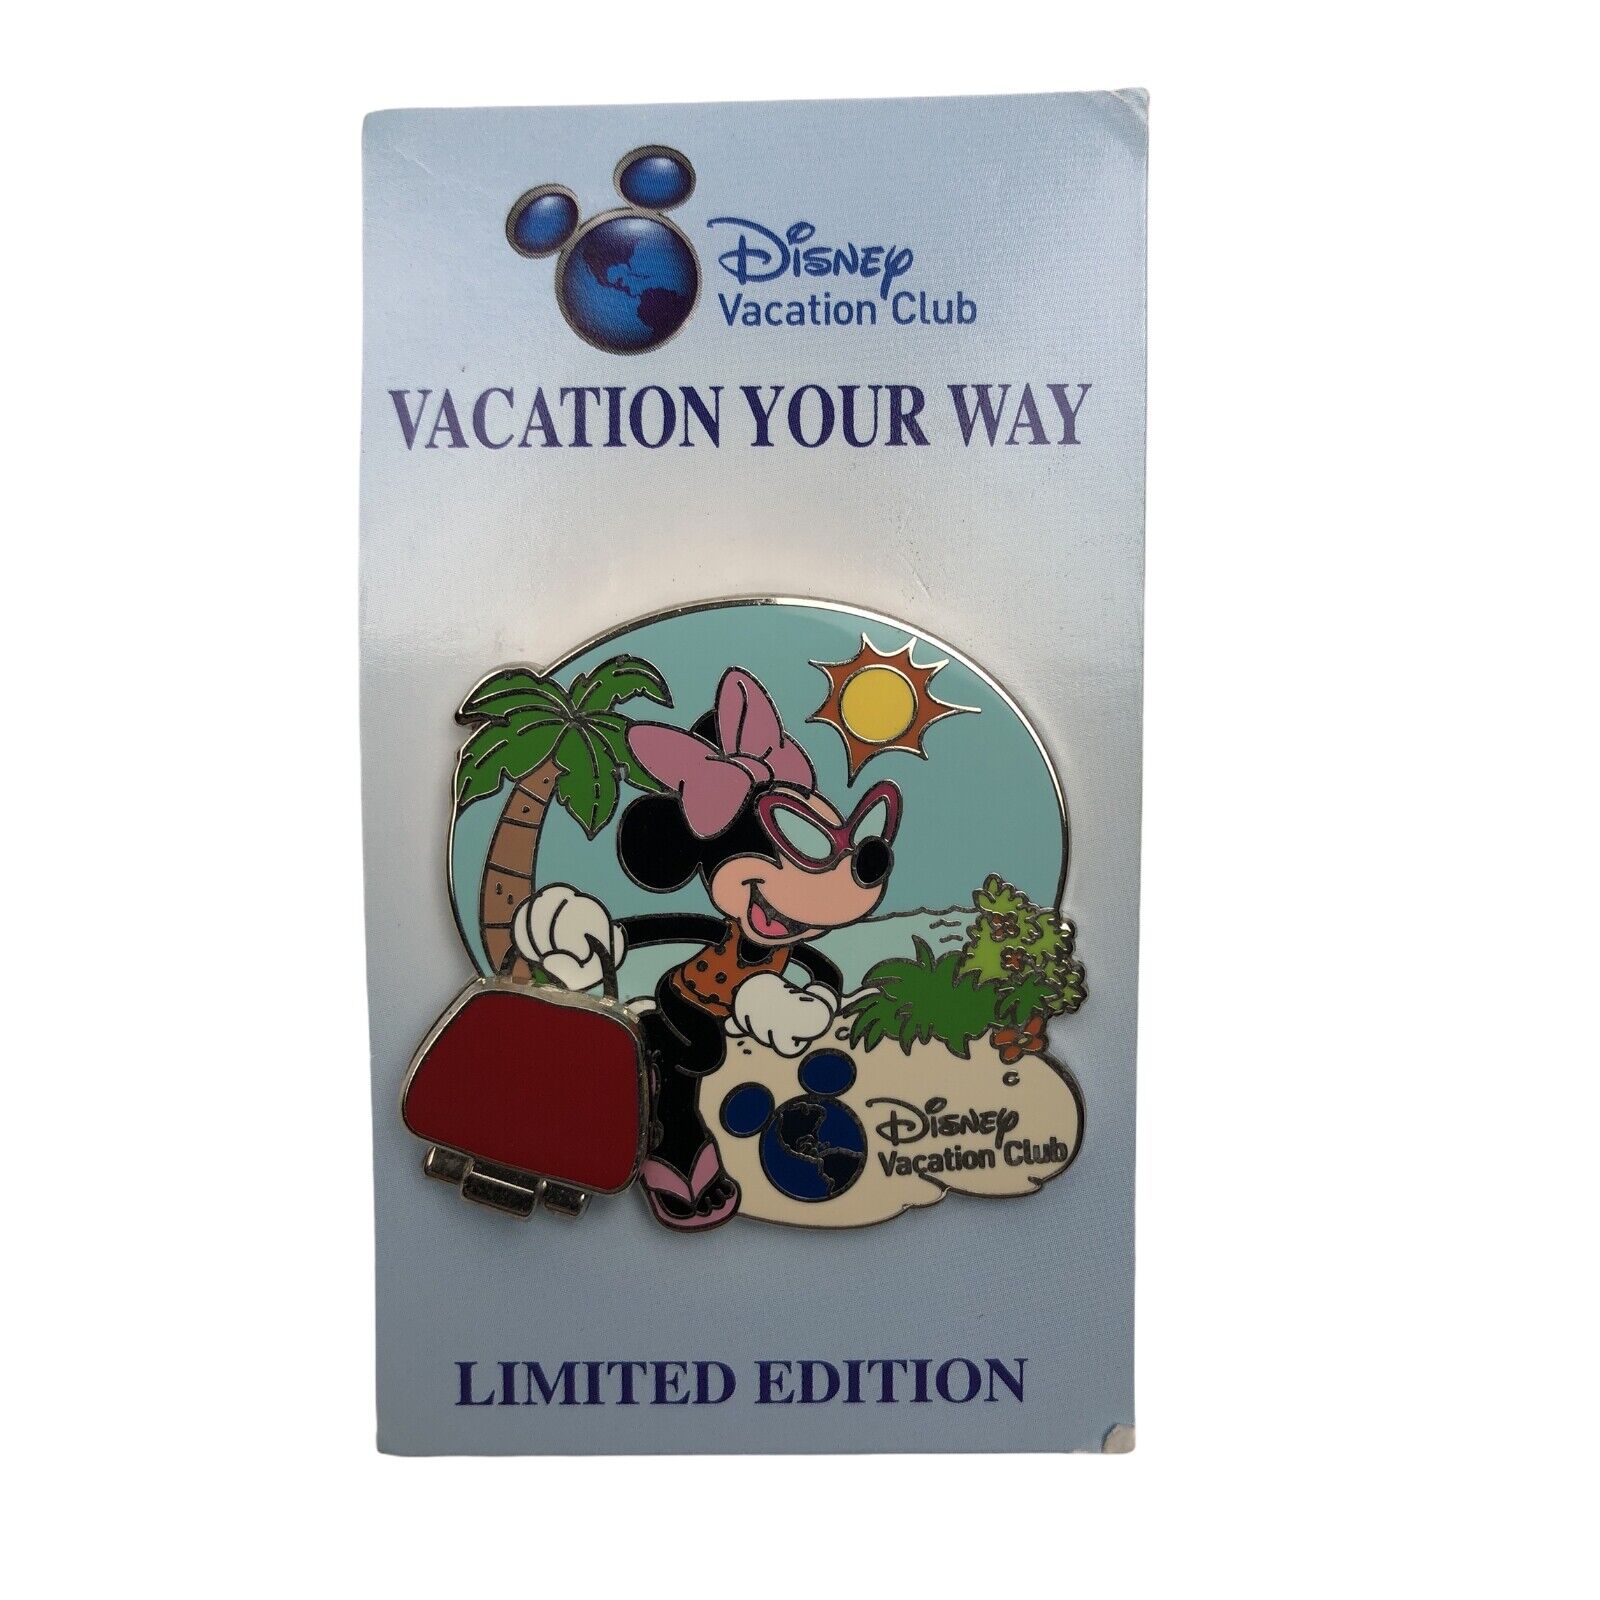 Disney Vacation Club 2012 Limited Edition Vacation Your Way Minnie Mouse Pin New